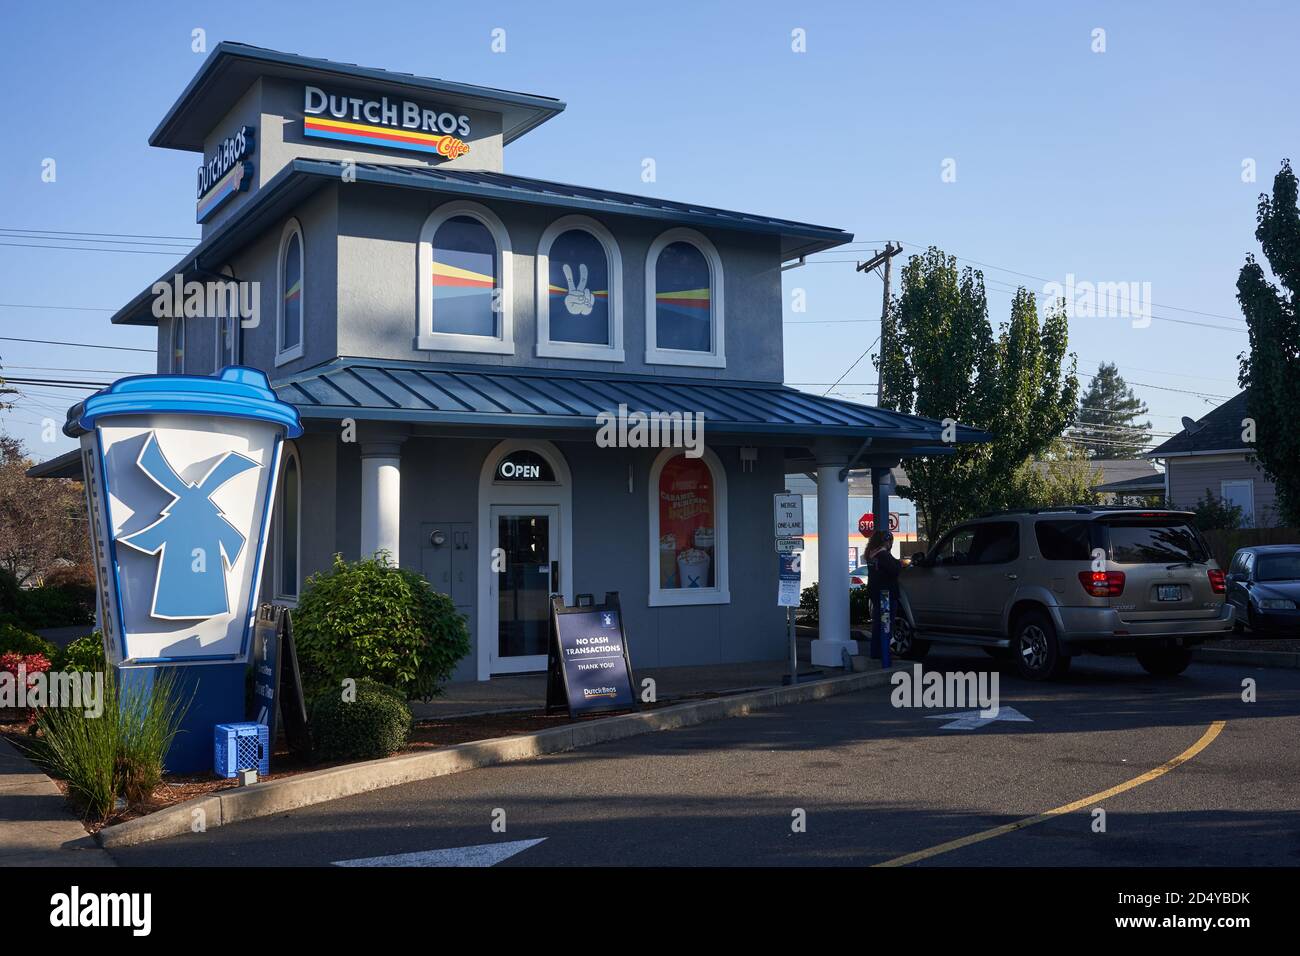 Dutch Bros Coffee shop in Oregon City during coronavirus pandemic.  Dutch Bros Coffee is America's largest privately-held drive-through coffee chain. Stock Photo